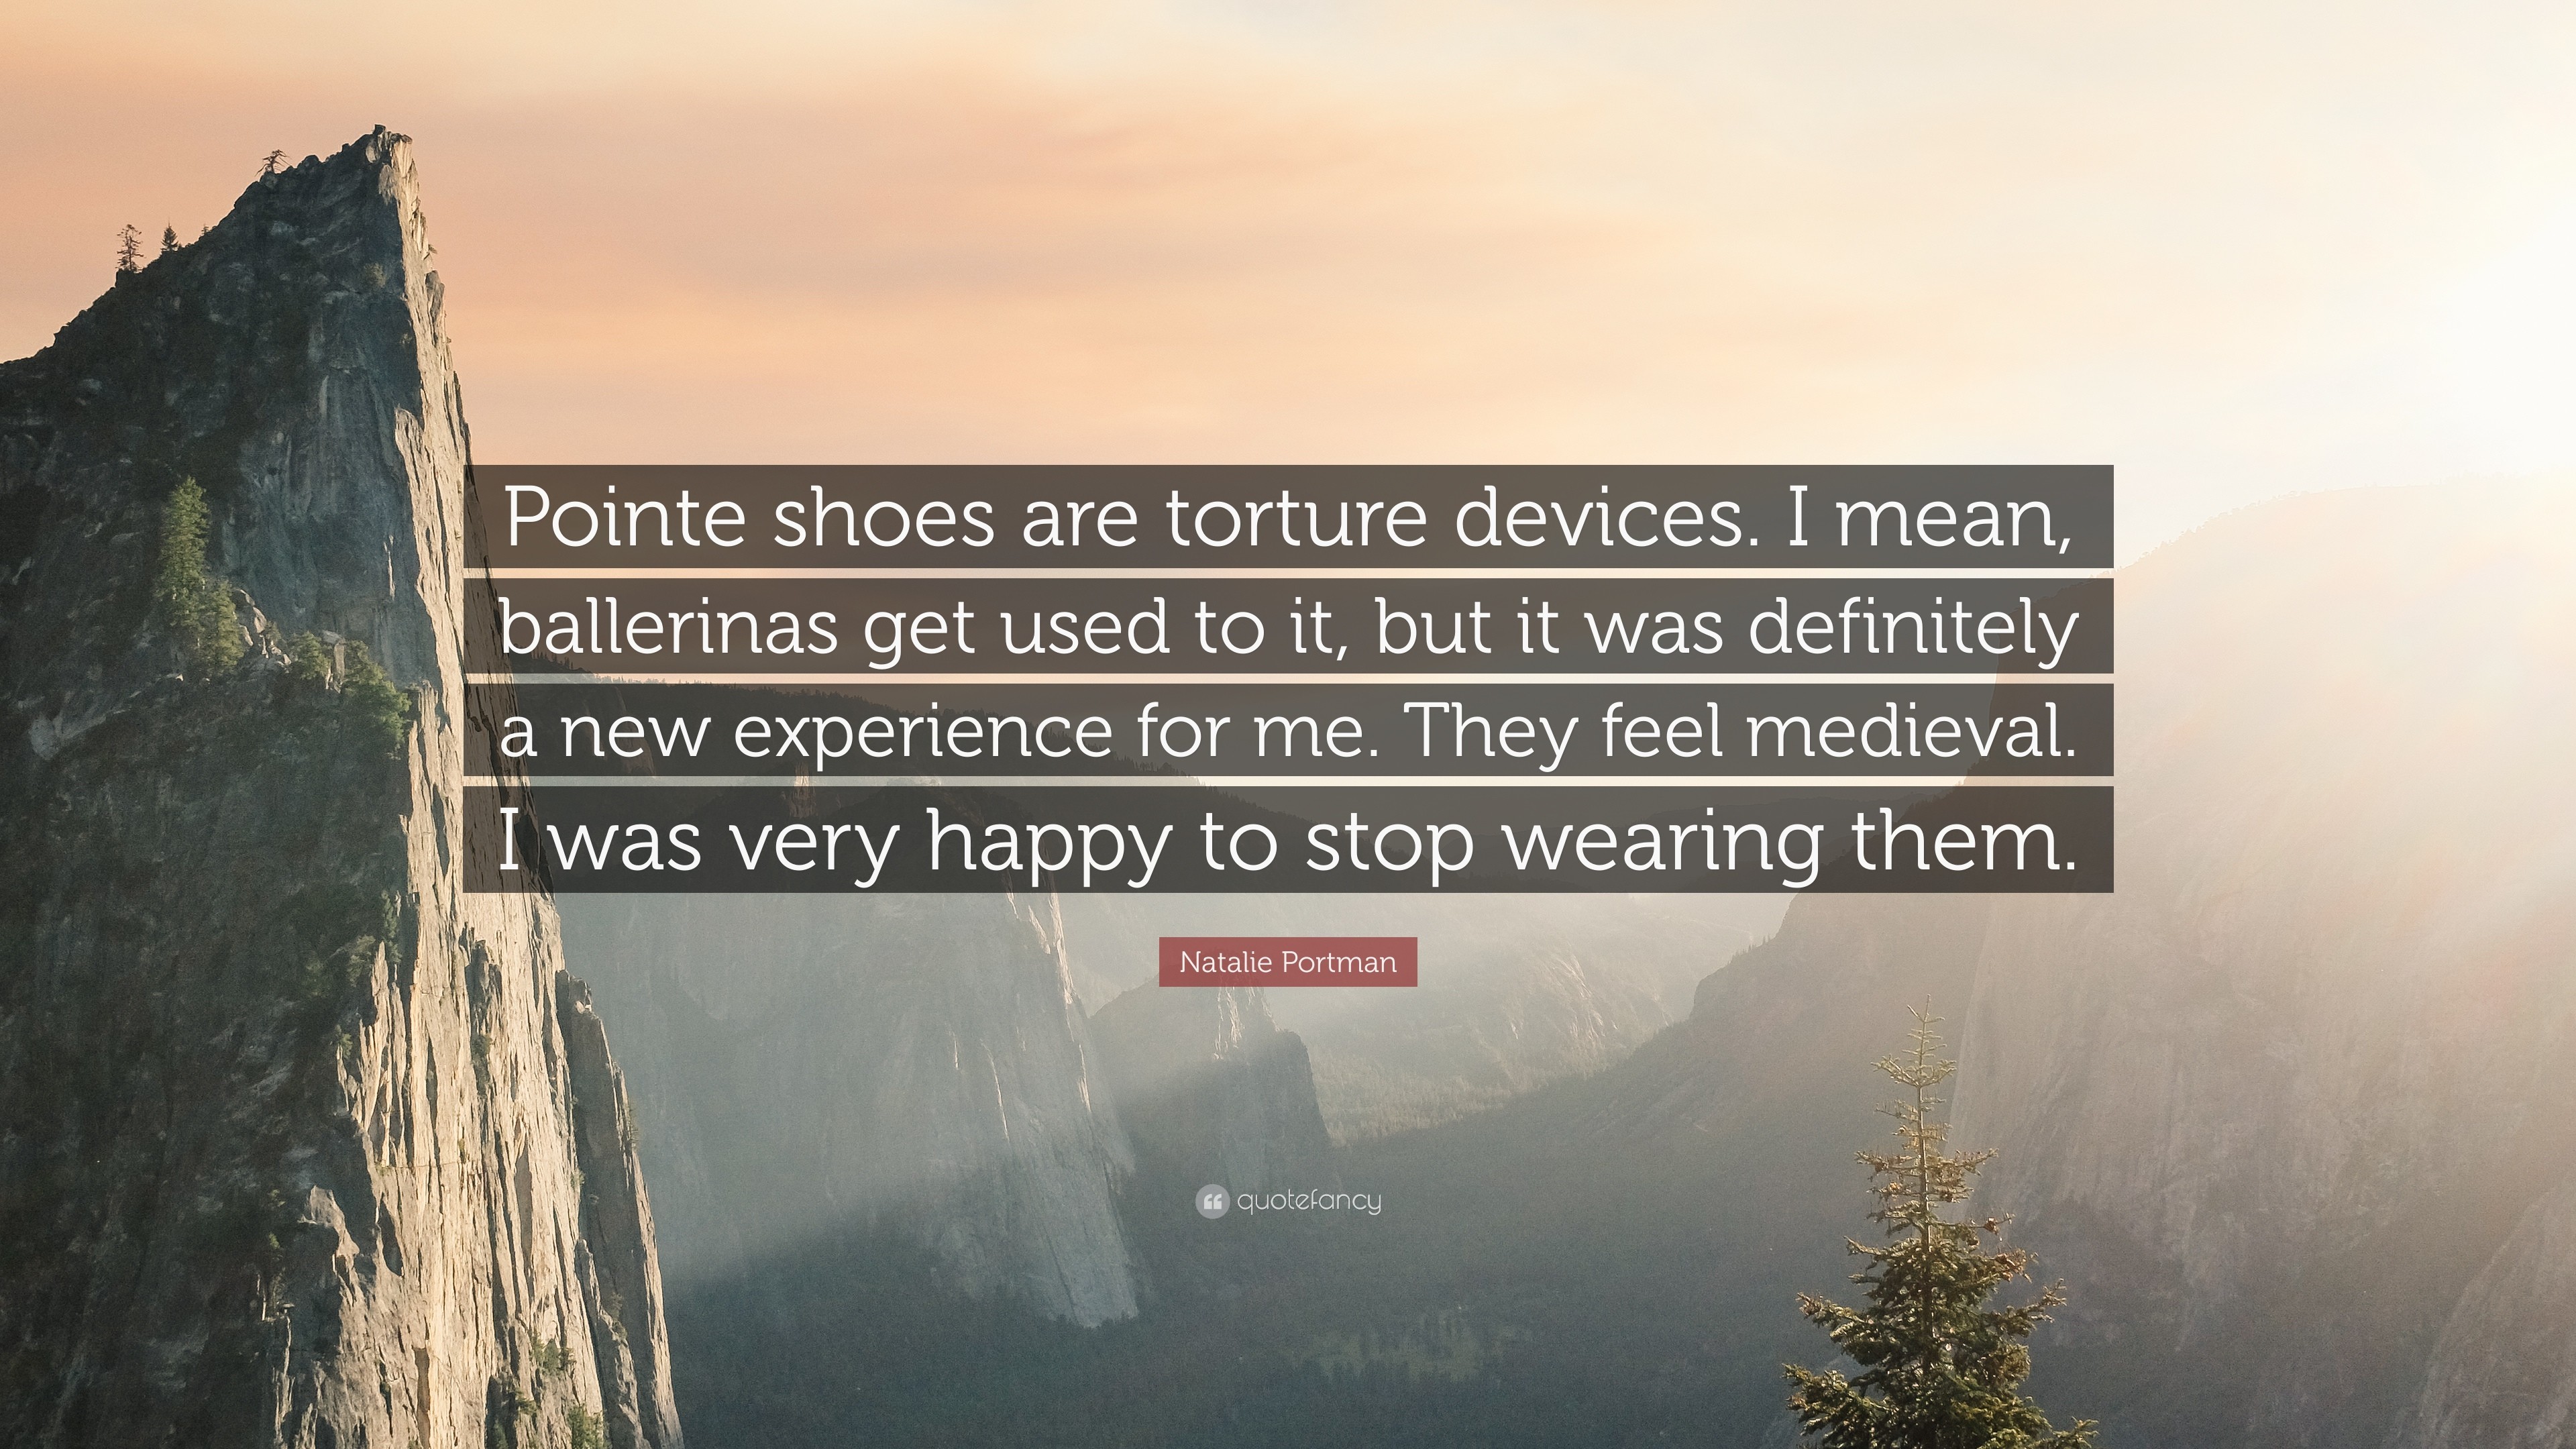 3840x2160 Natalie Portman Quote: “Pointe shoes are torture devices. I mean,  ballerinas get